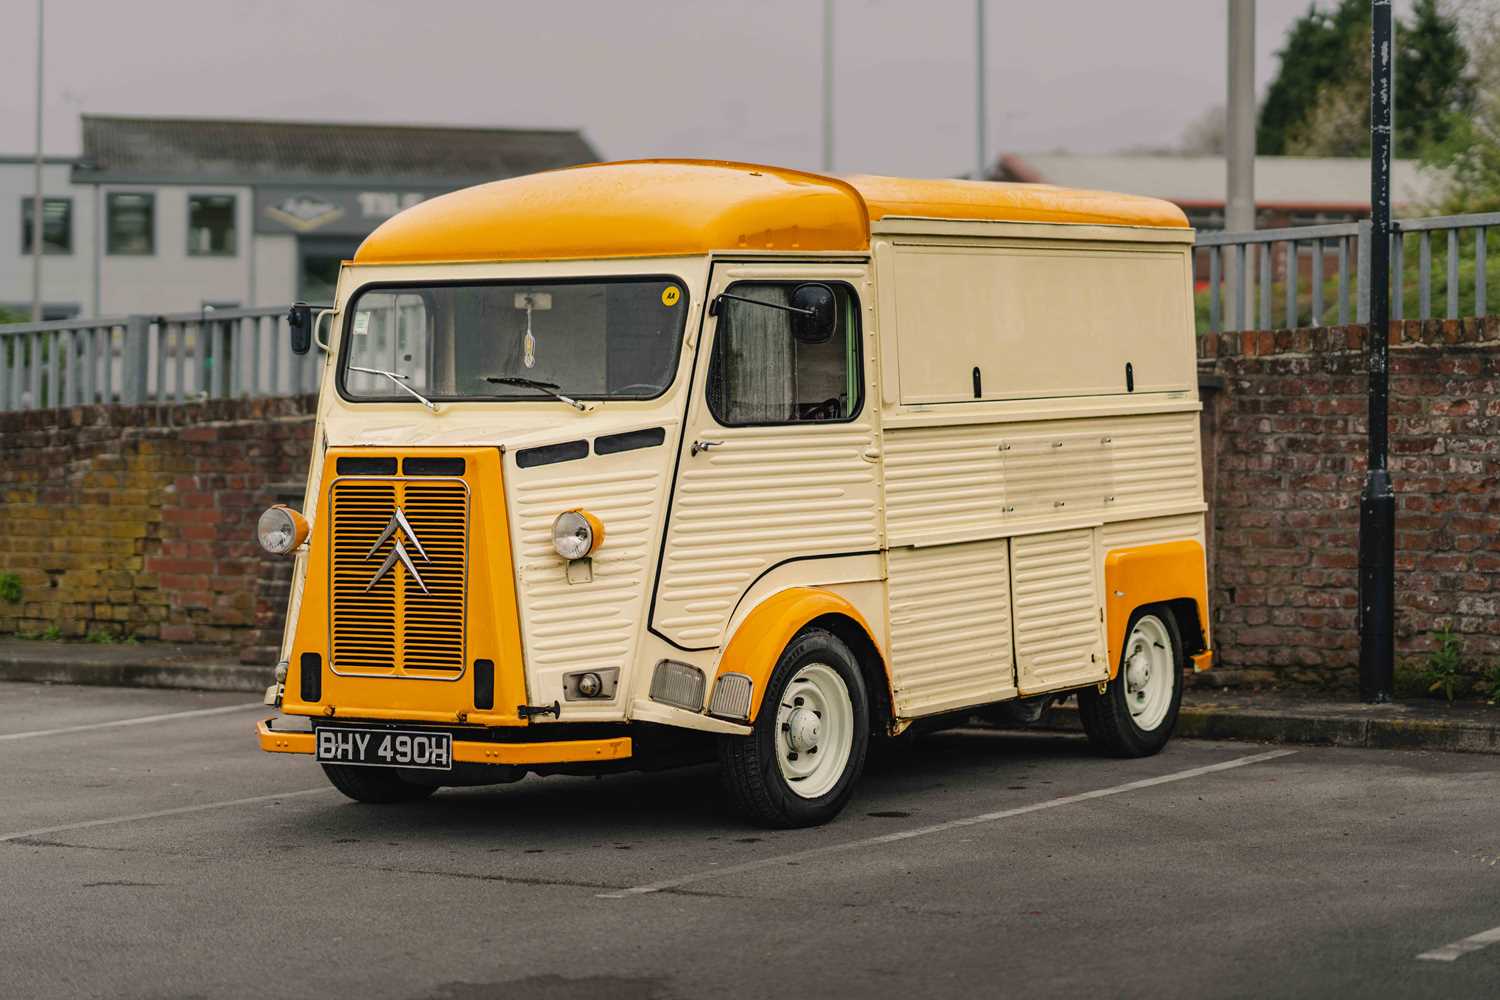 1970 Citroen HY Van Fully fitted-out boutique catering van ready to go into business - Image 5 of 59